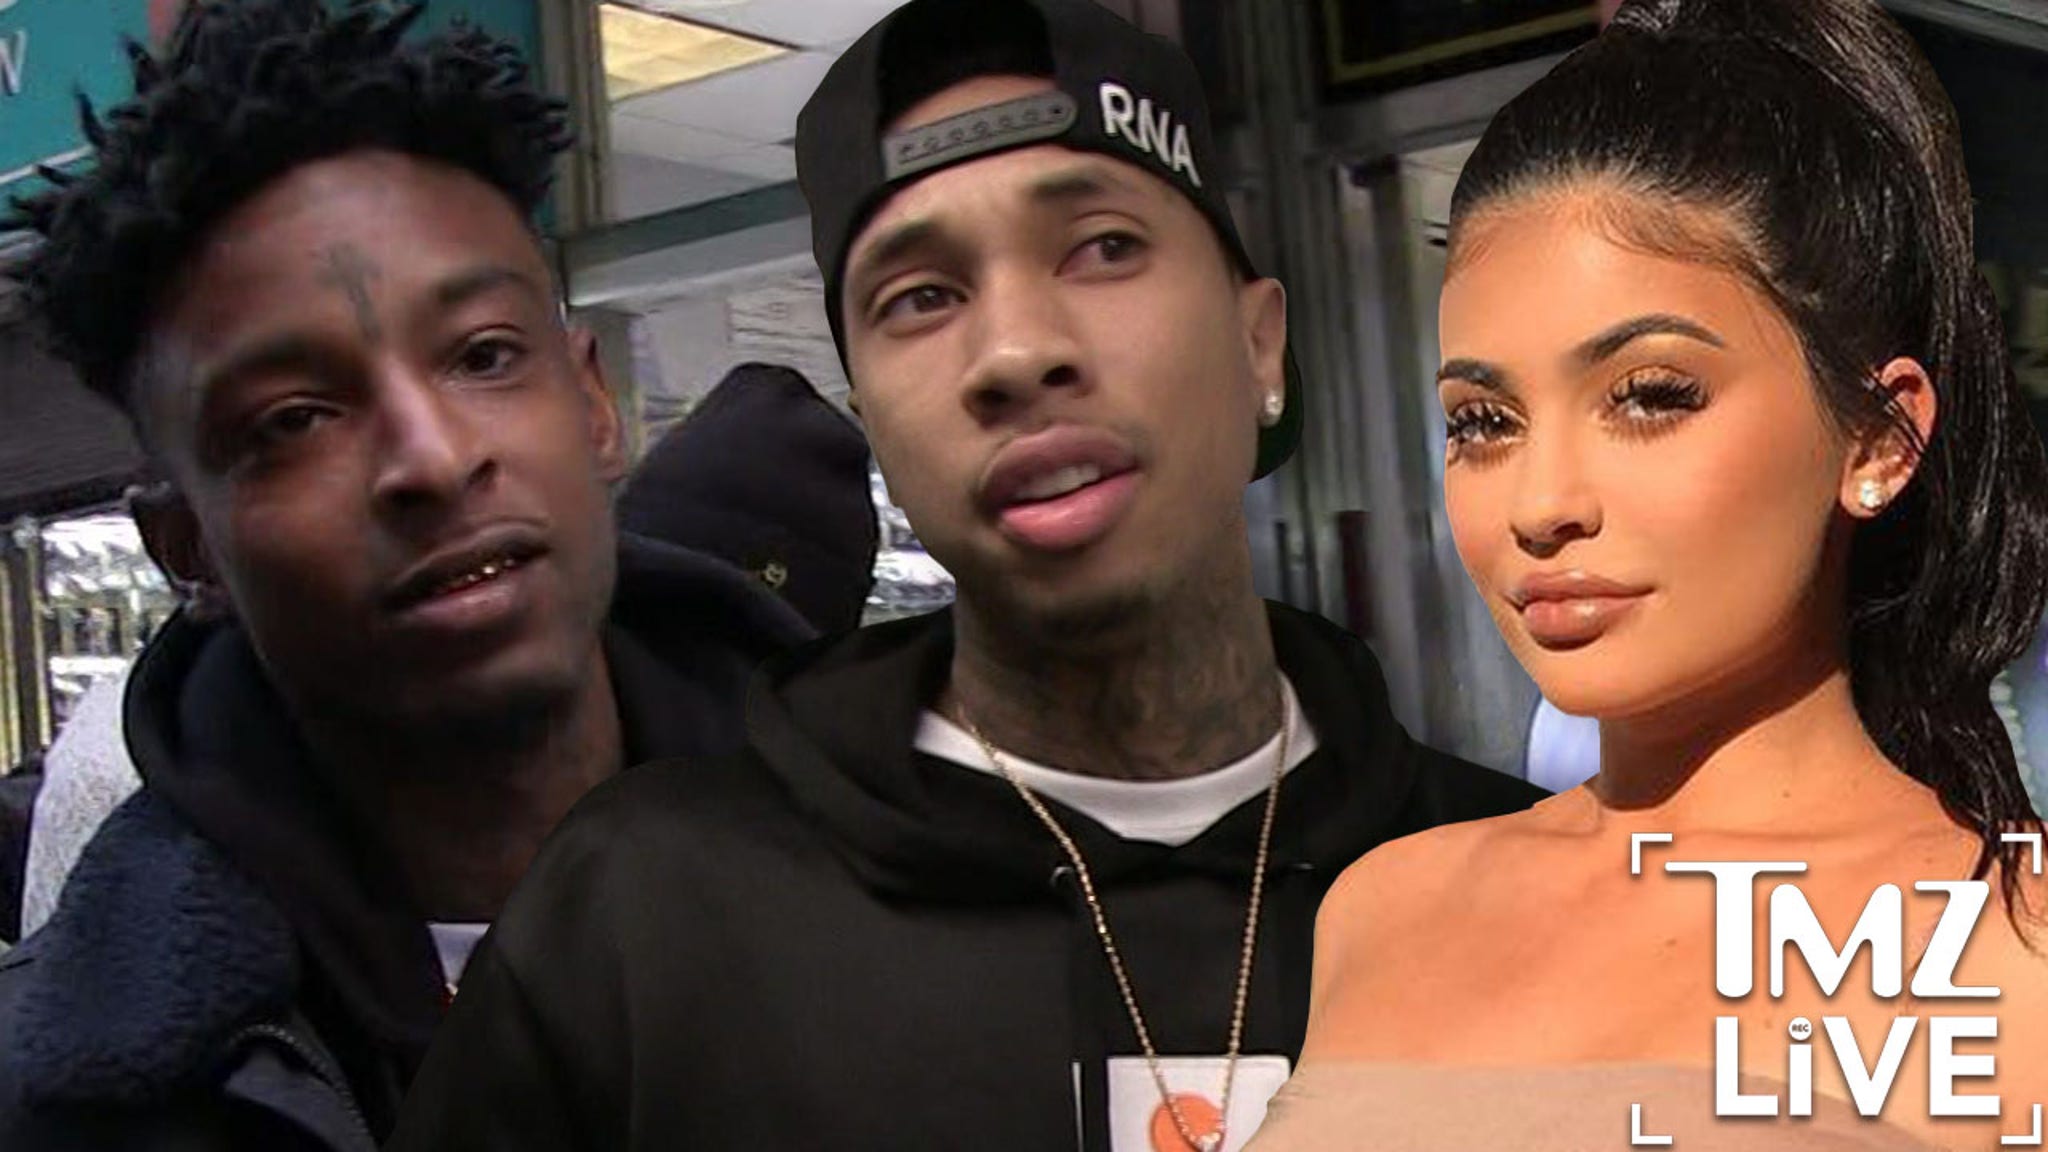 21 Savage Flirts Online With Kylie Jenner, Fans Blast Tyga On His Instagram  Page.